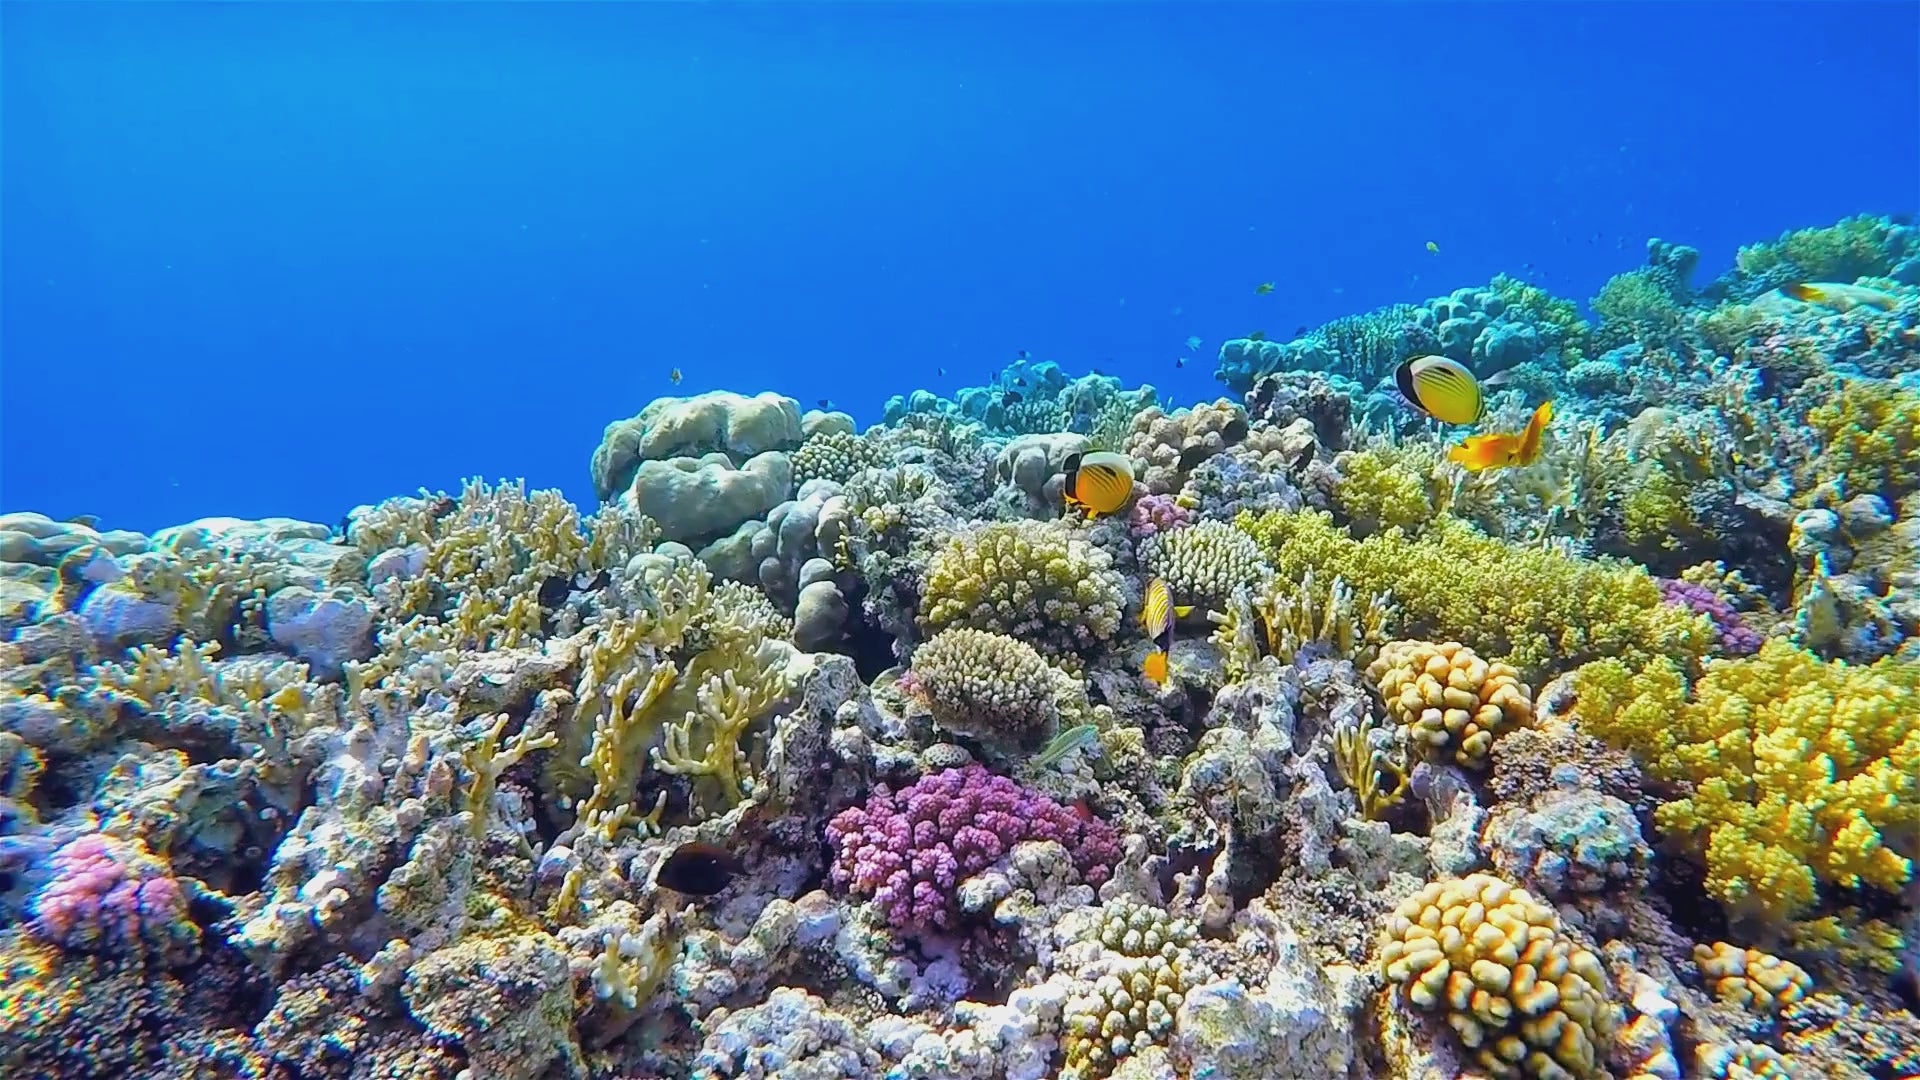 Load video: Removing plastic, planting coral and planting trees to restore ocean health.